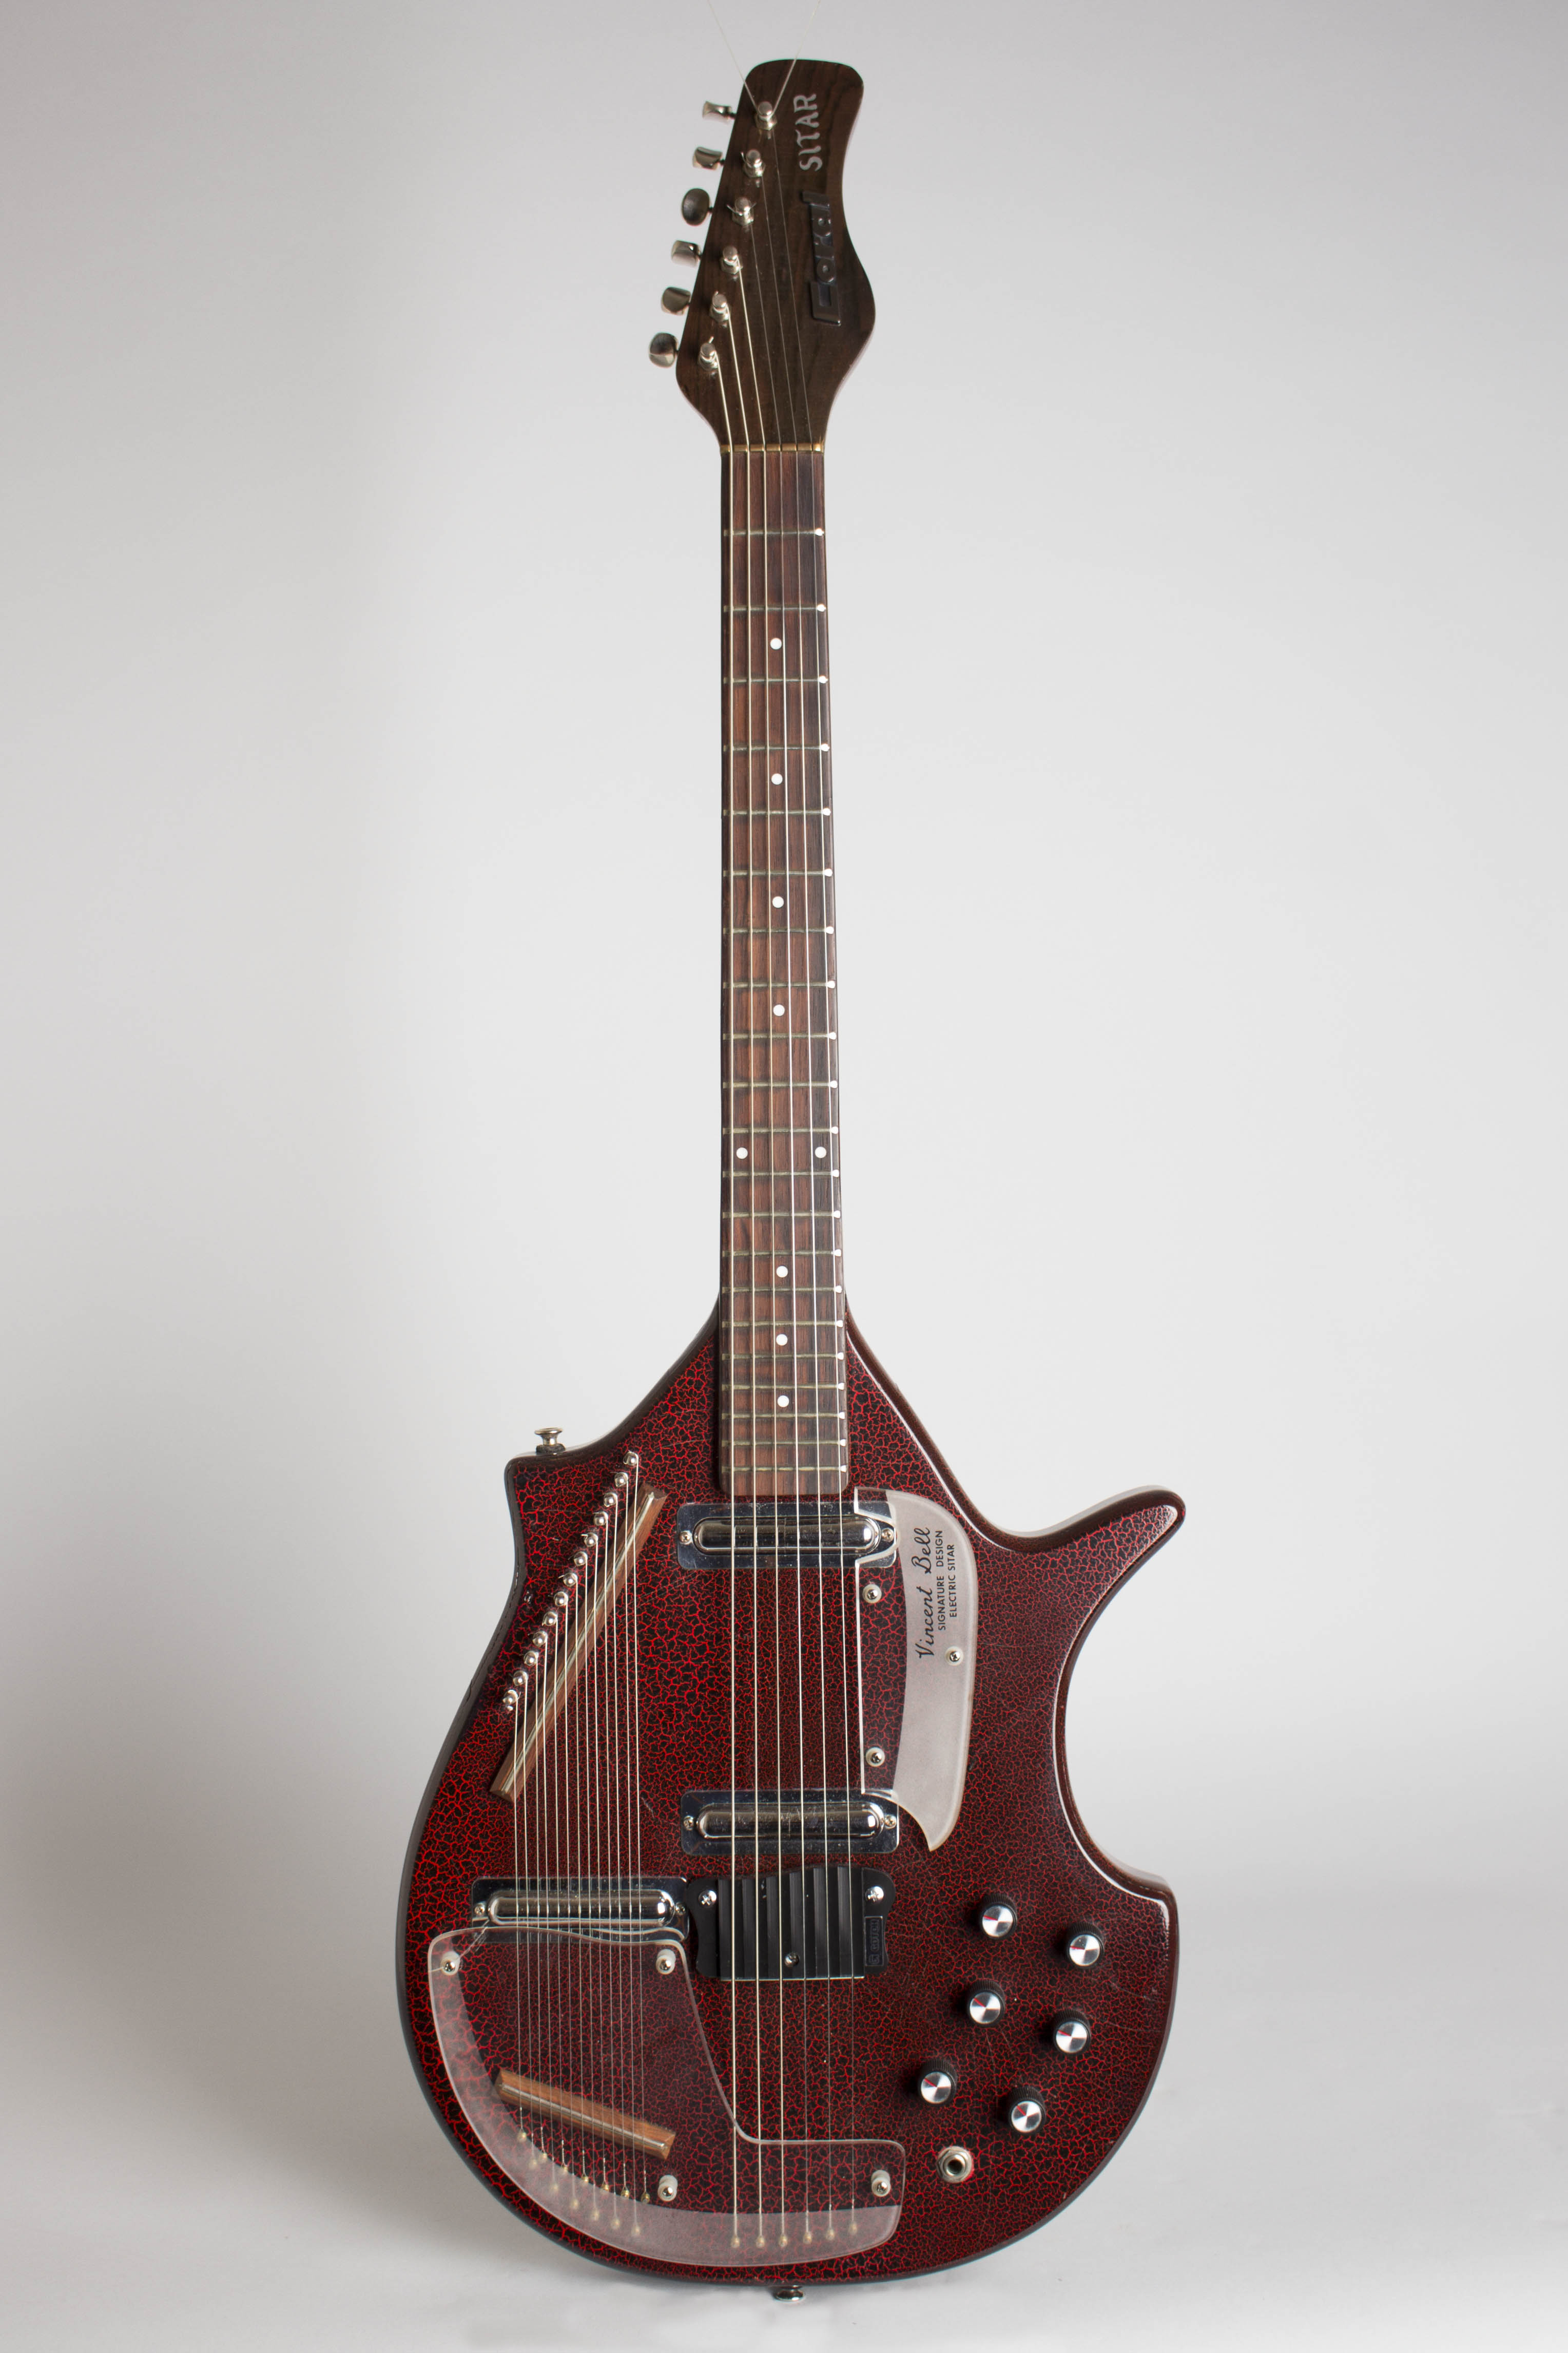 Arving Syd Tag et bad Coral Sitar Semi-Hollow Body Electric Guitar, made by Danelectro (1968) |  RetroFret